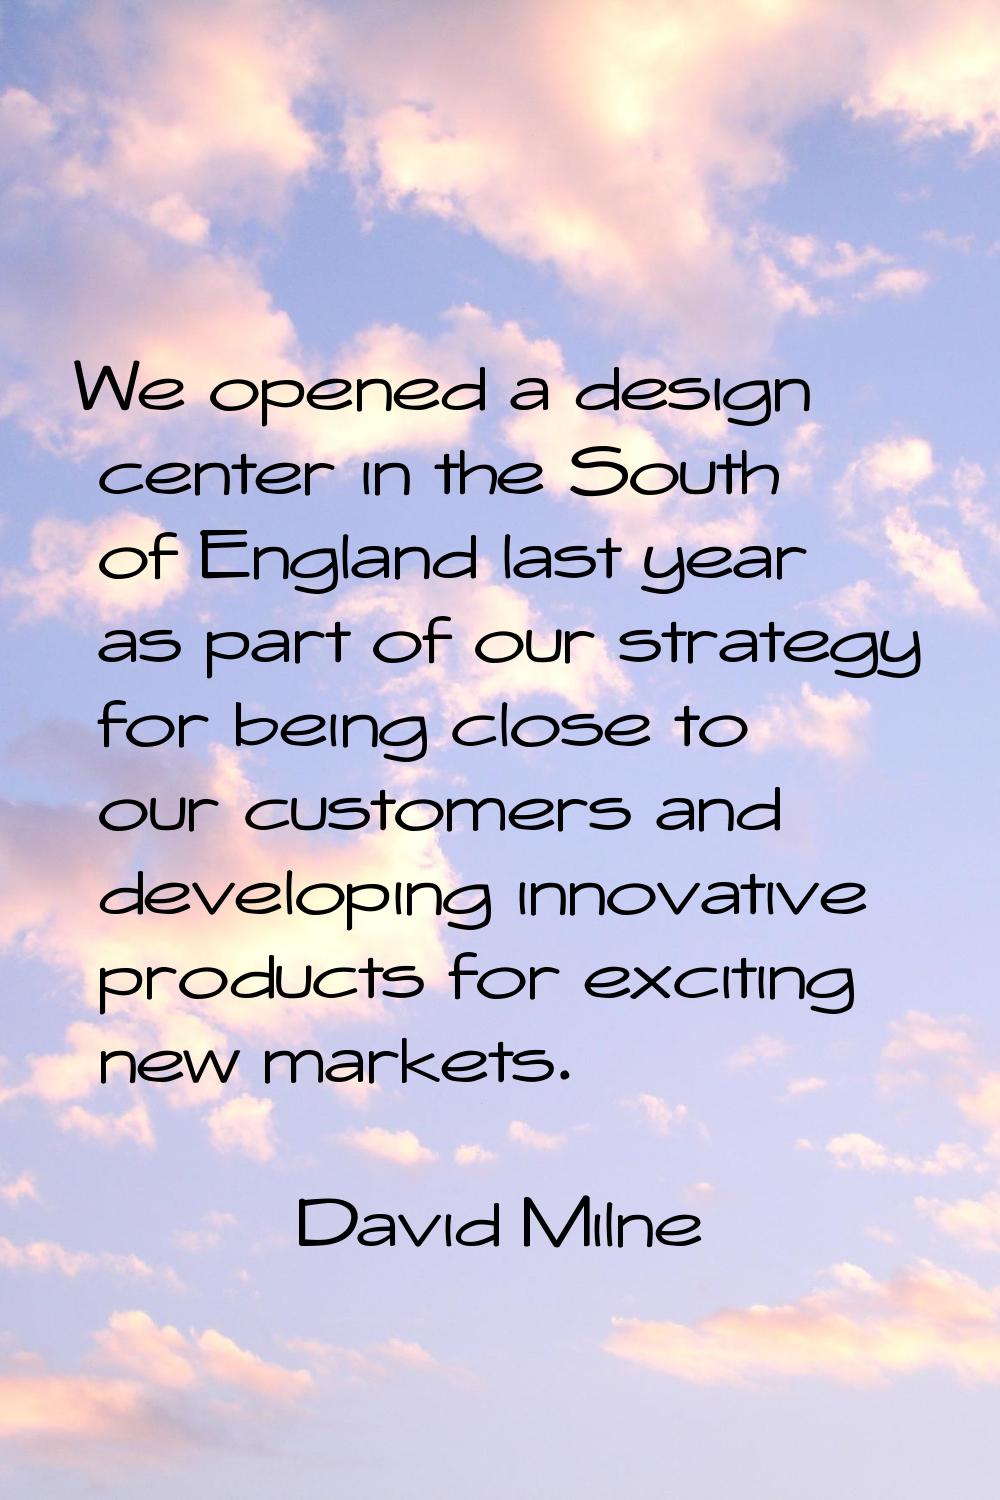 We opened a design center in the South of England last year as part of our strategy for being close